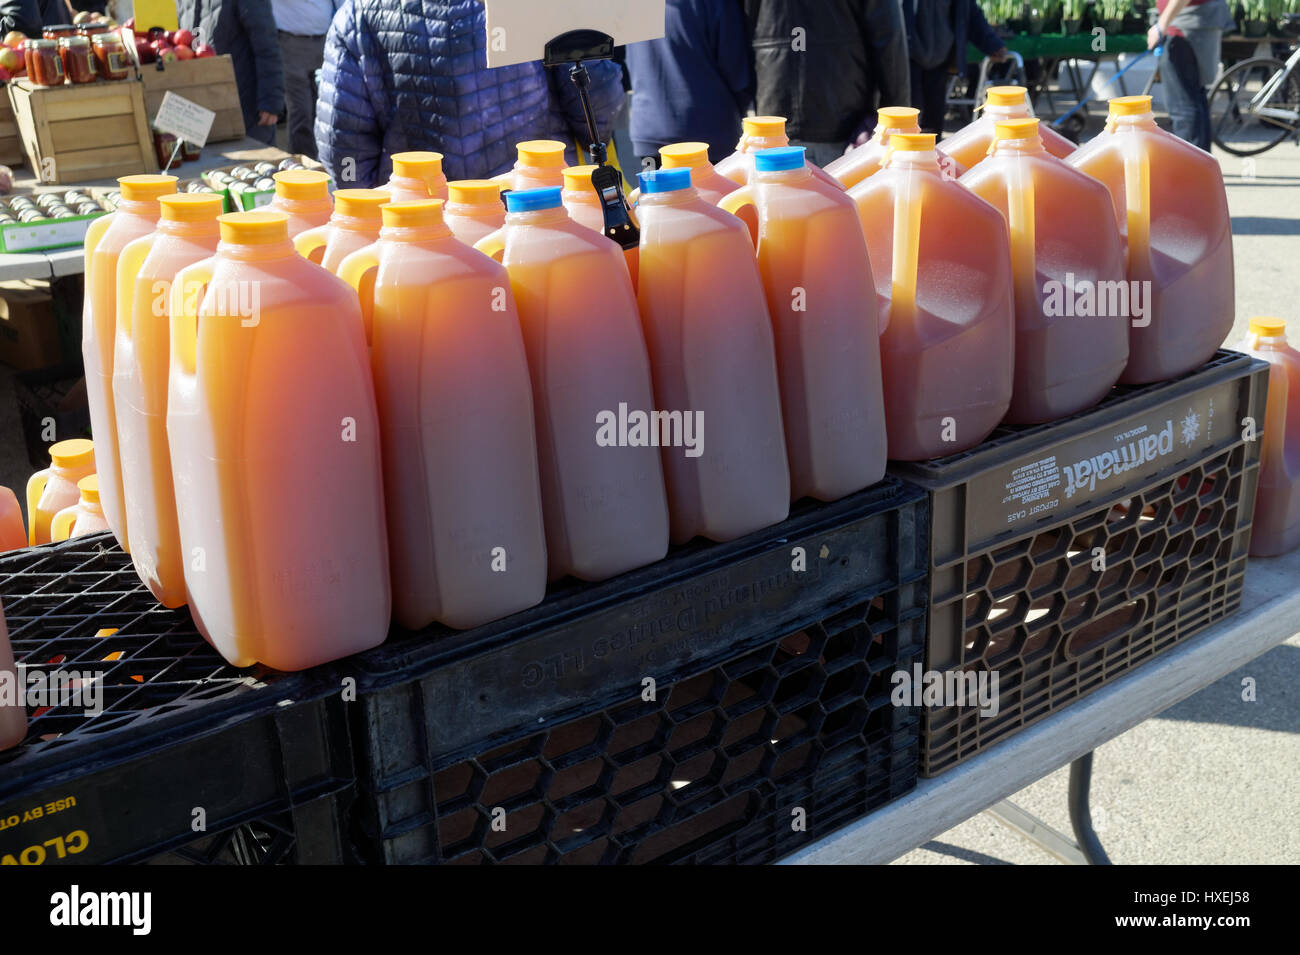 Jugs of fresh pressed apple cider for sale at a farmer's market. Stock Photo